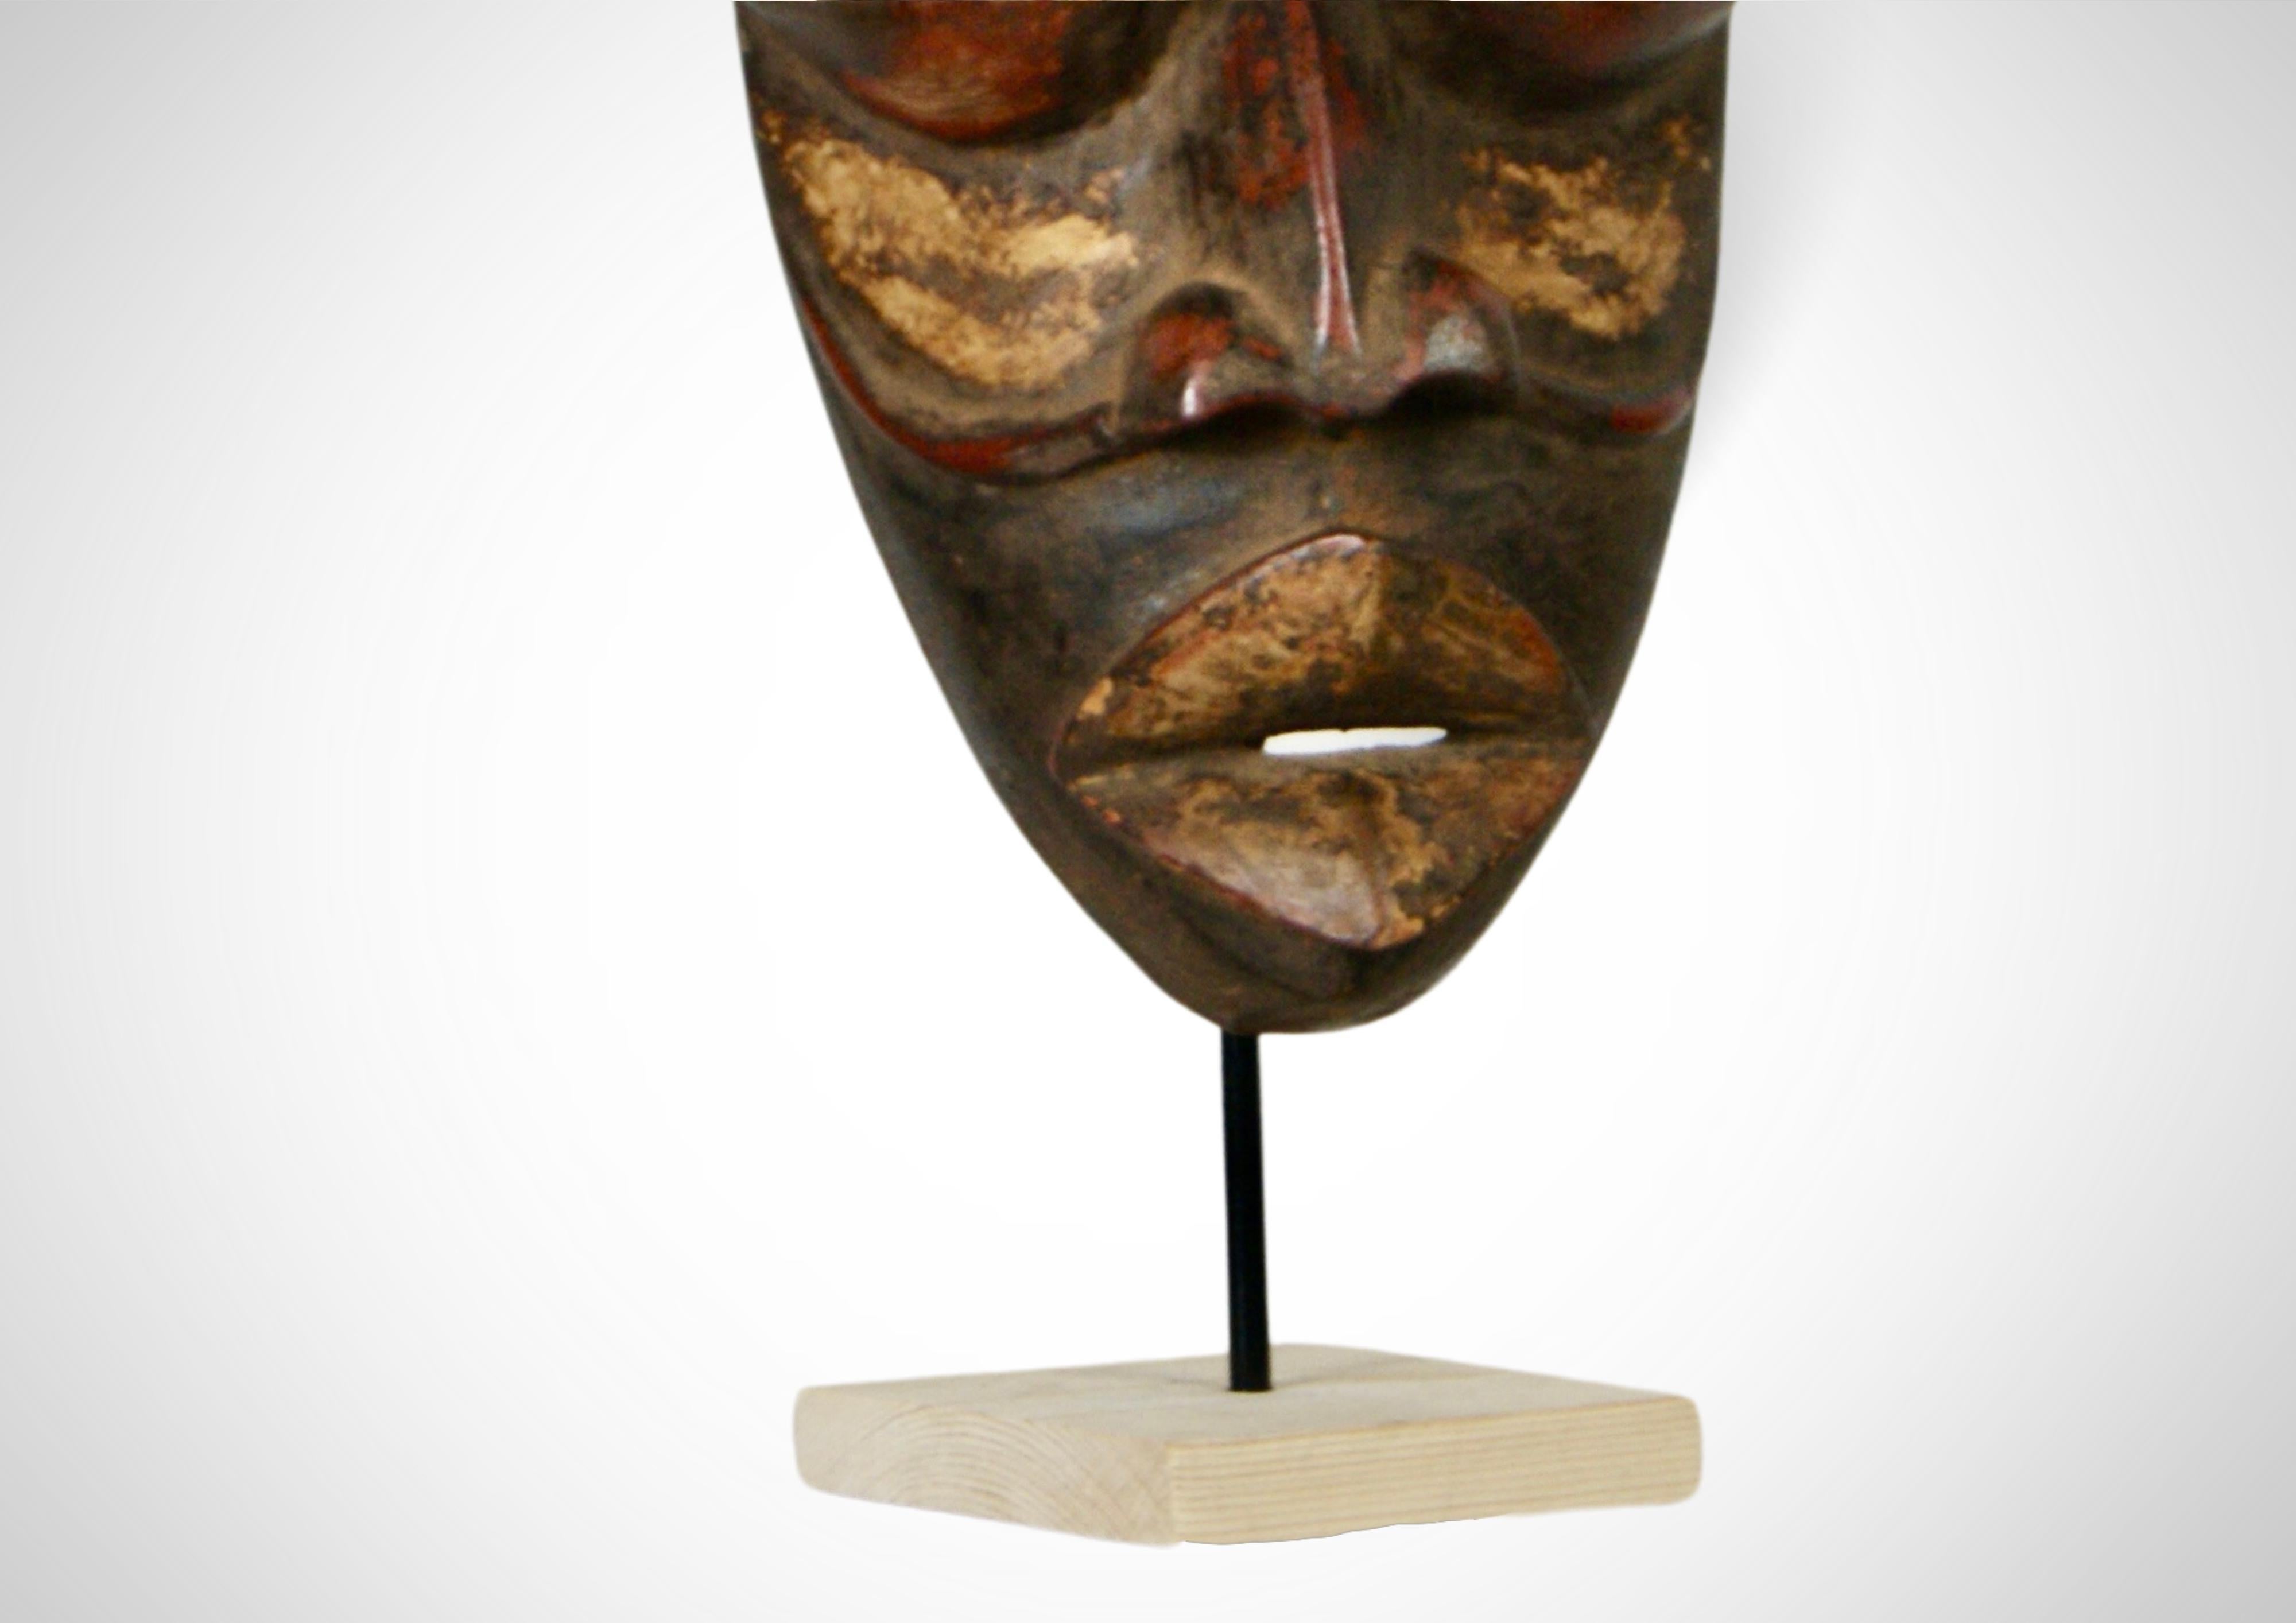 Wood Ancestral Dan Mask 'Deangle' with Cowrie Shells Large For Sale